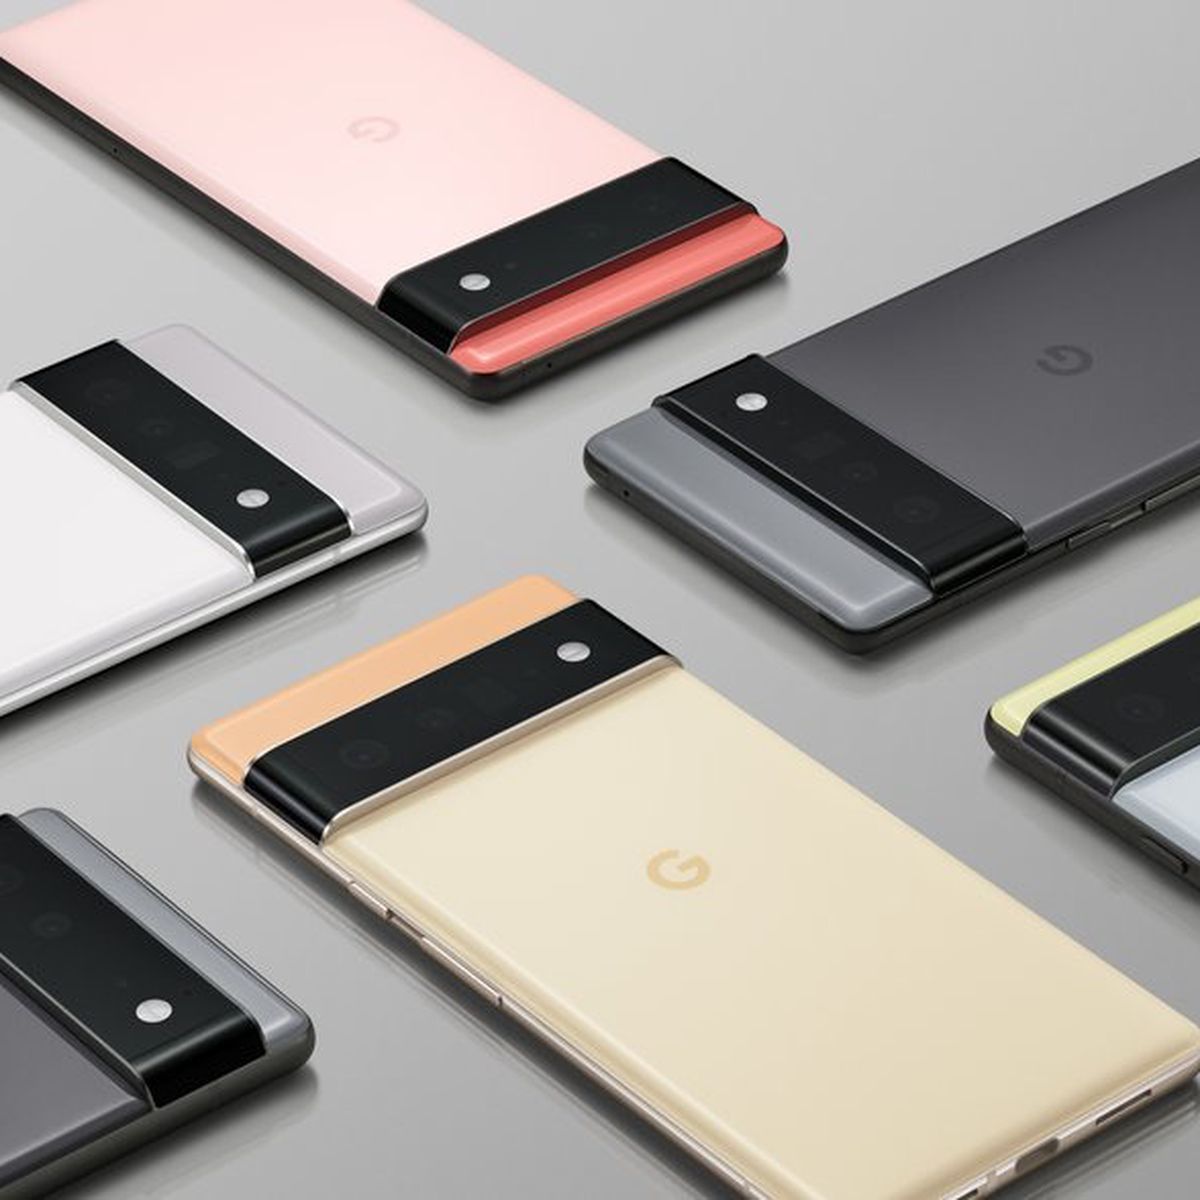 is genoeg cowboy Manifestatie Google Launches New Flagship Pixel 6 and Pixel 6 Pro Smartphones Priced at  $599 and $899 - MacRumors